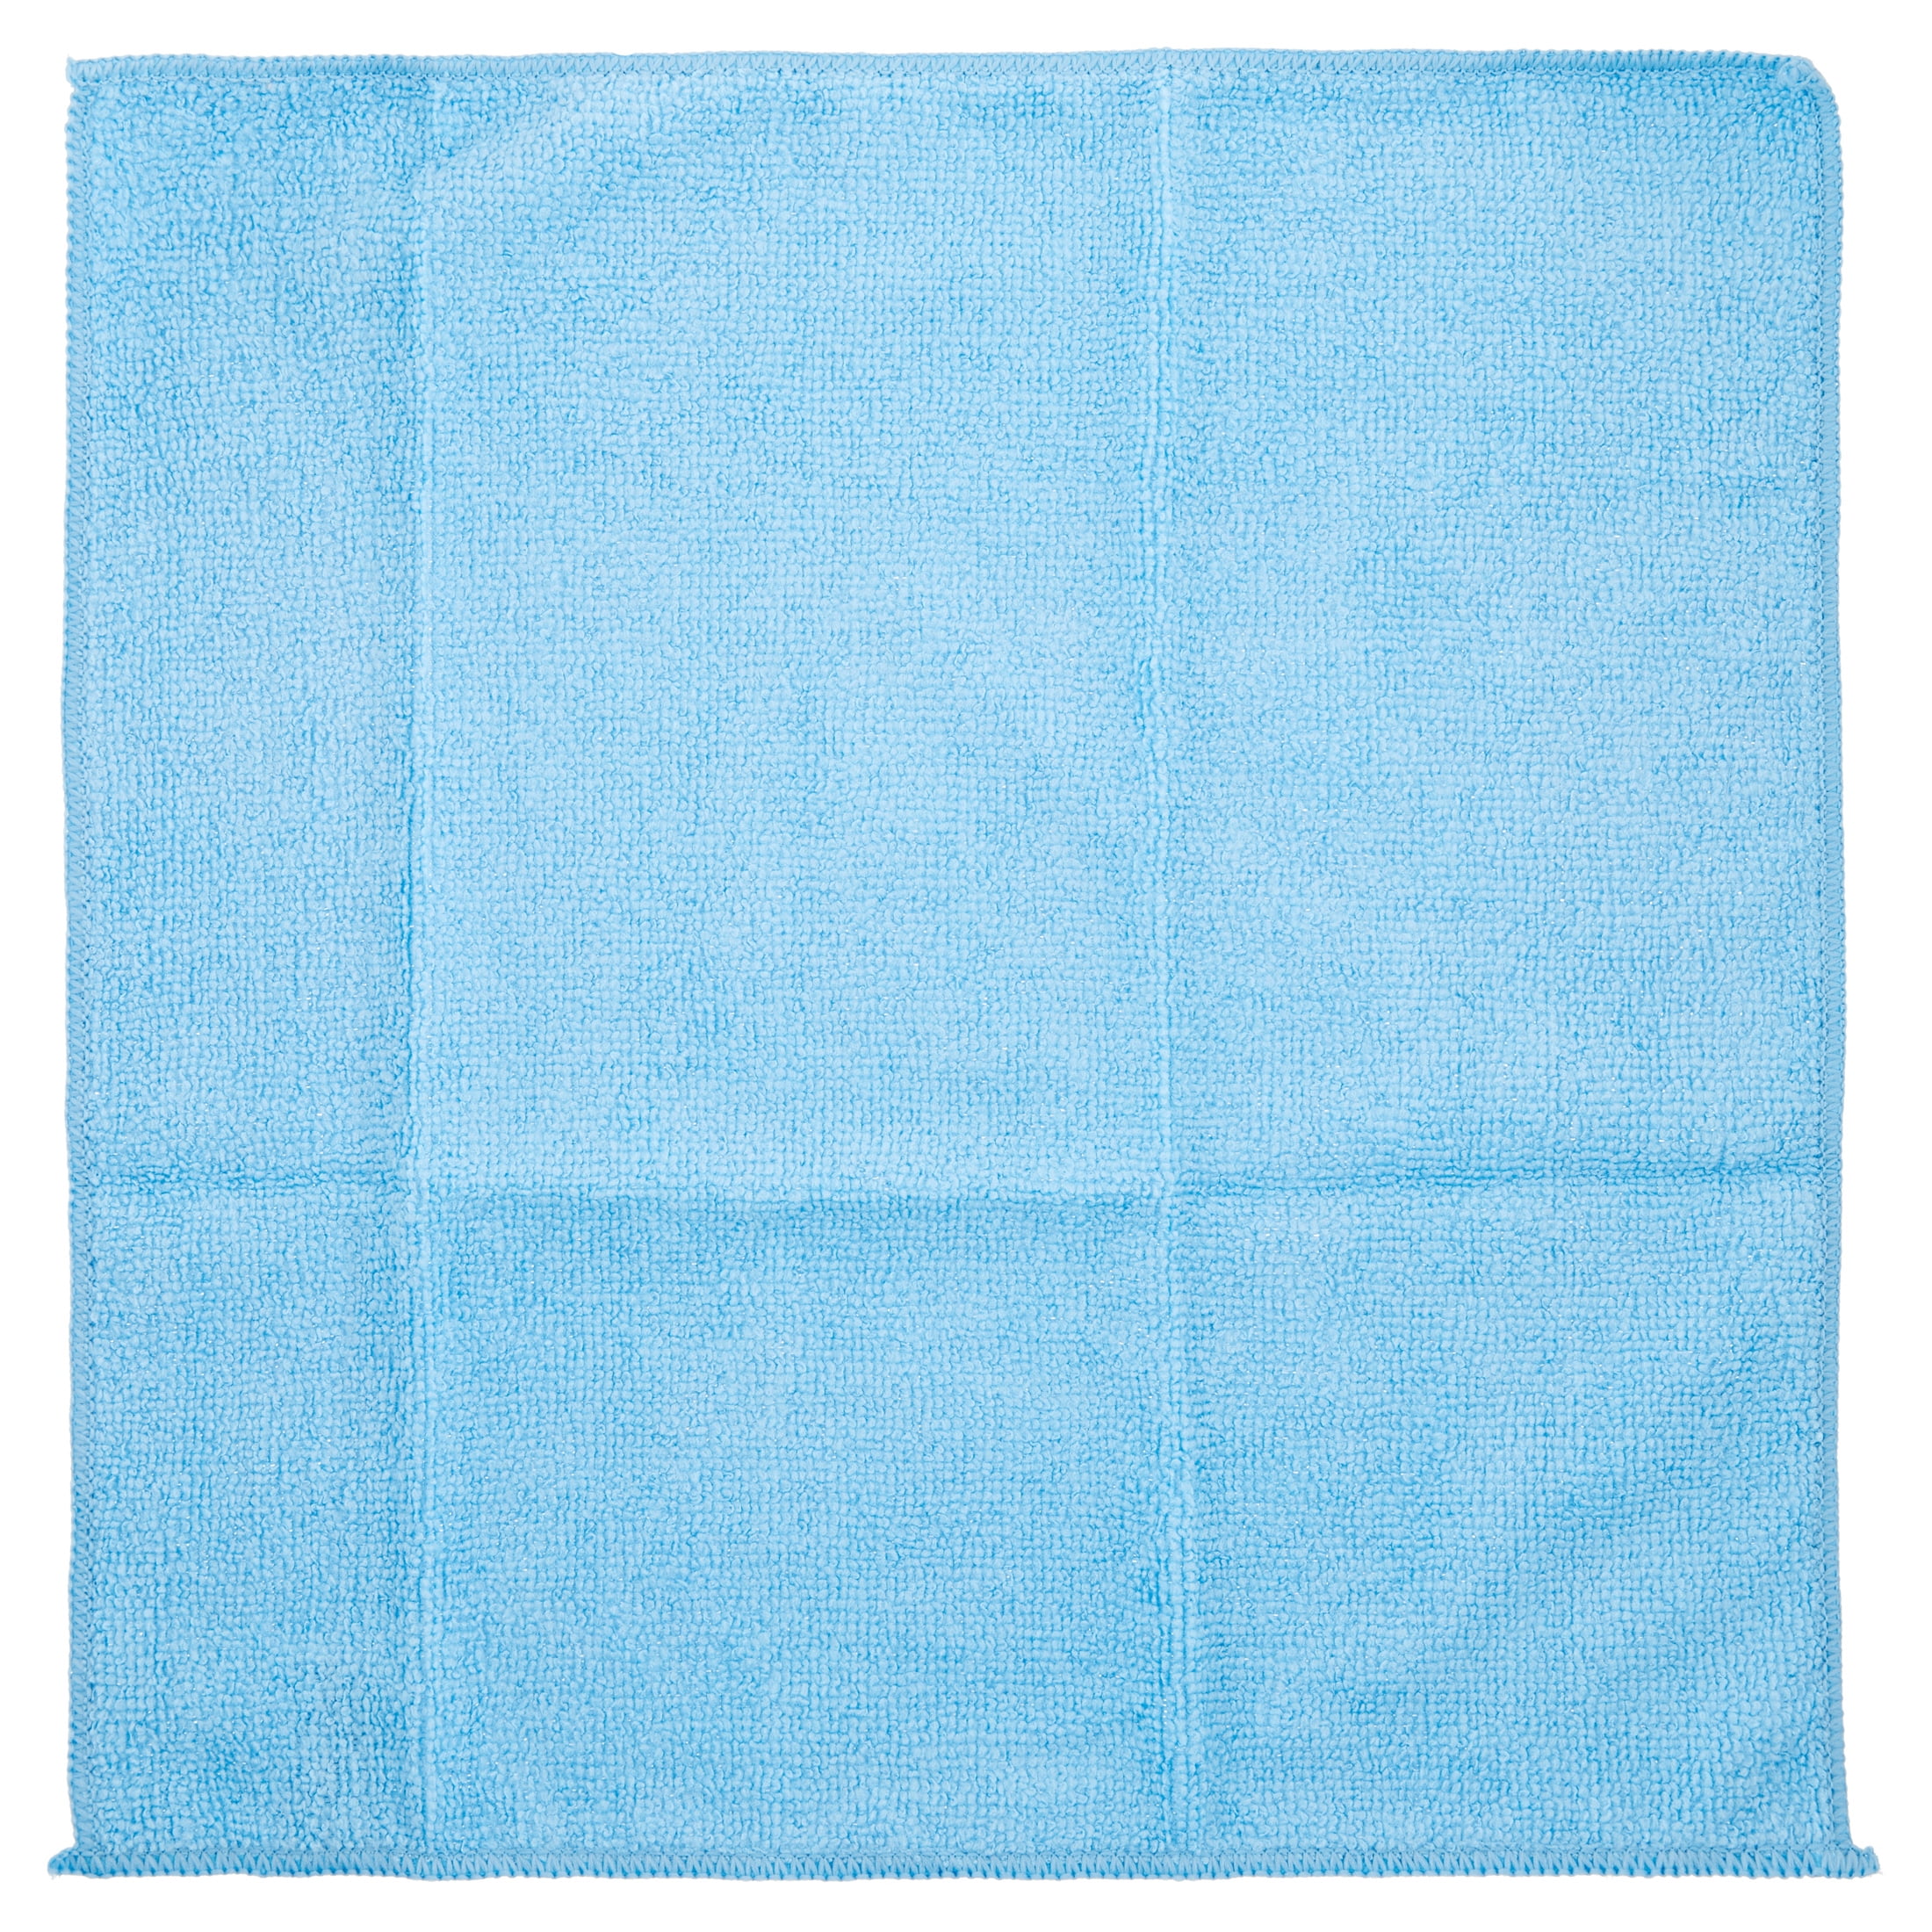 Quickie Microfiber Cleaning Cloth, 14 x 14 in., Blue, 24 Pack, Washable and Reusable, All-Purpose Towel/Wiper for Multi-Purpose Indoor/Outdoor